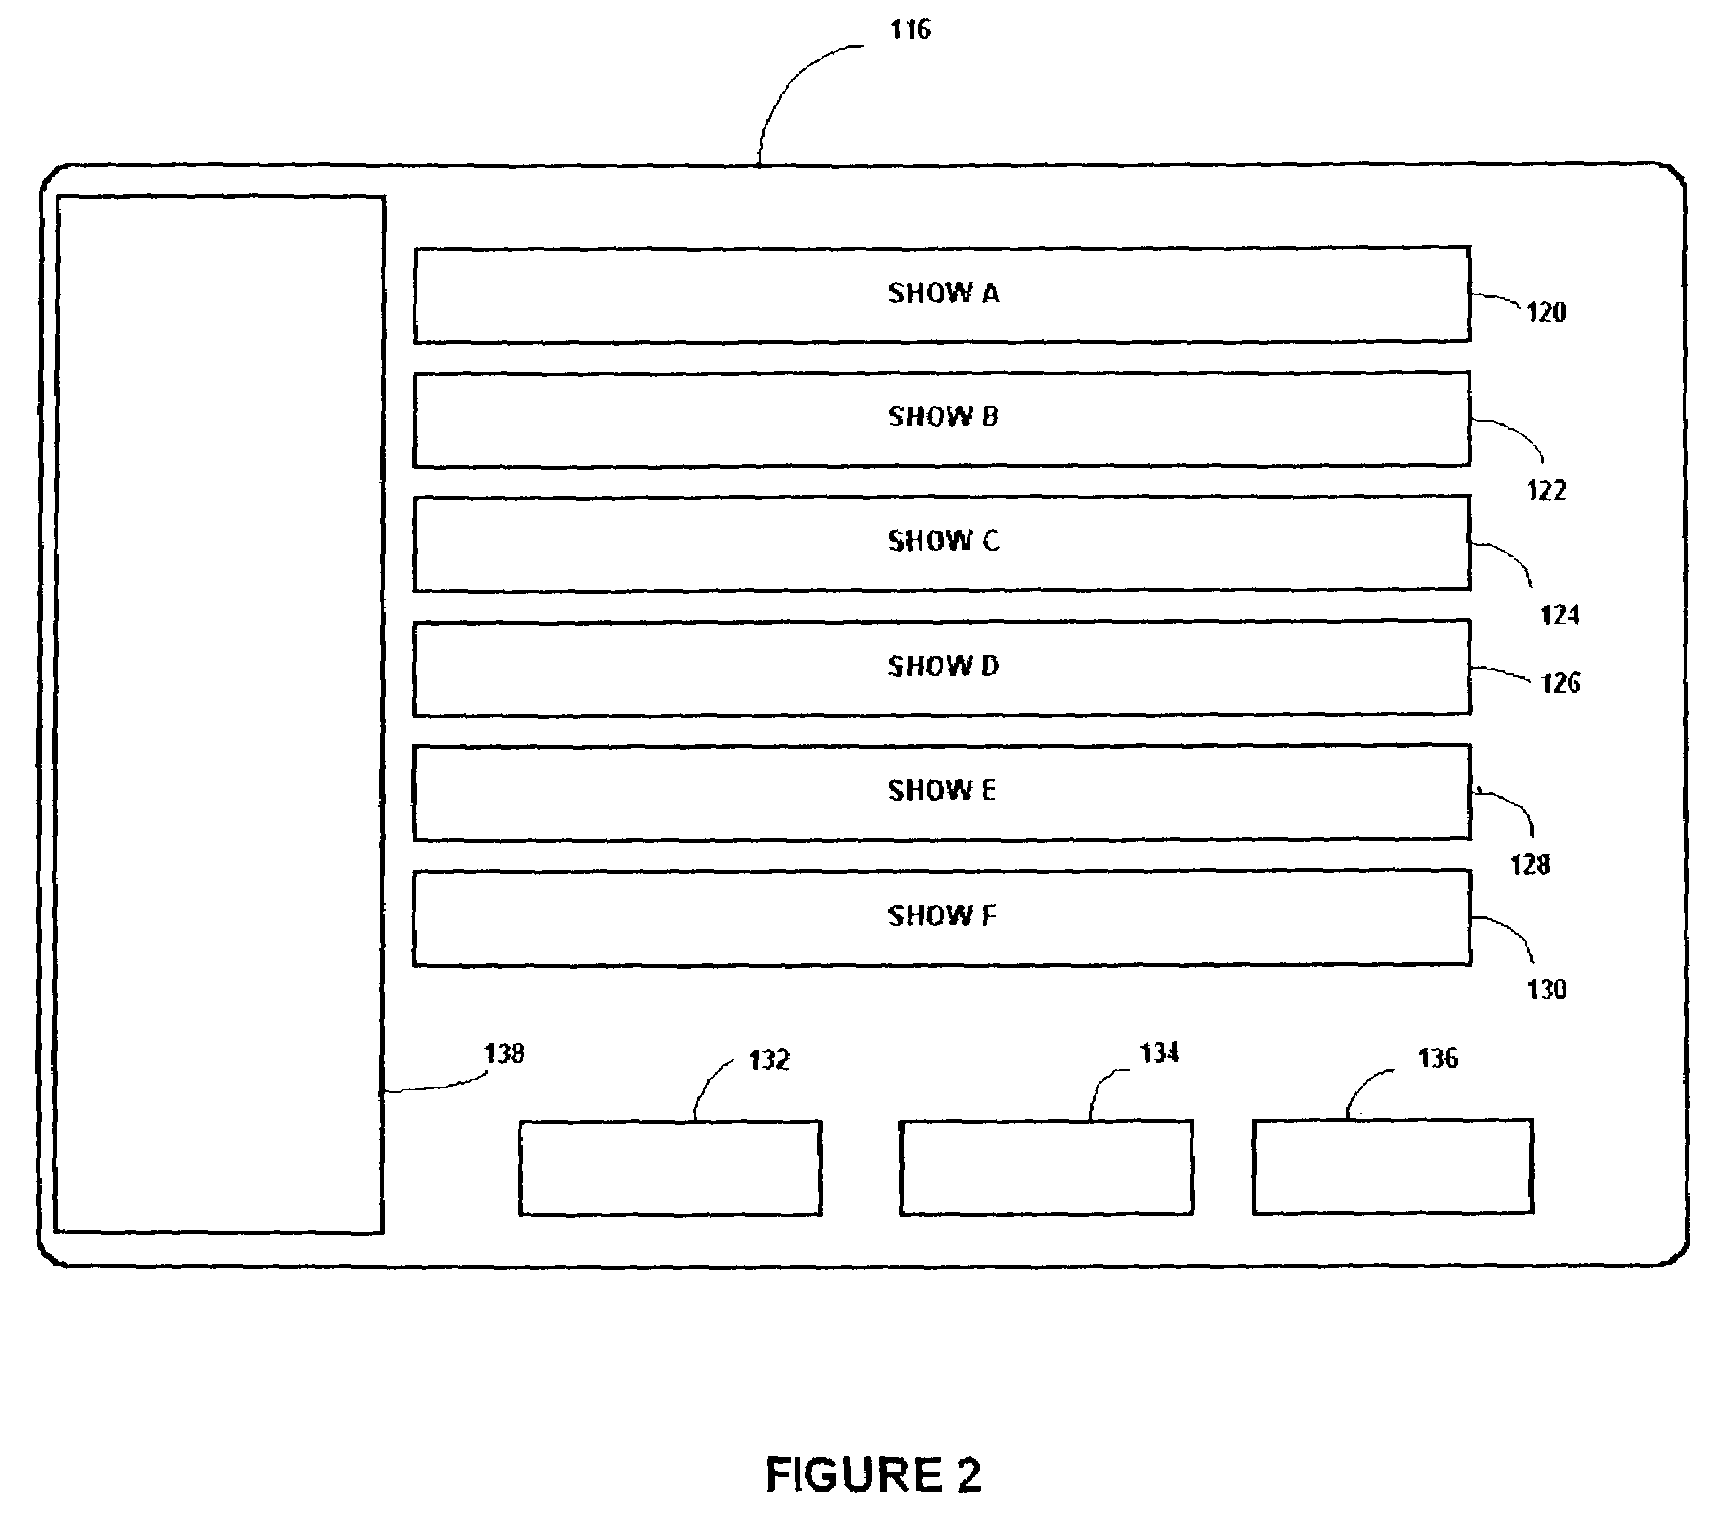 Recommendation-based electronic program guides with user-imperceptible preferences